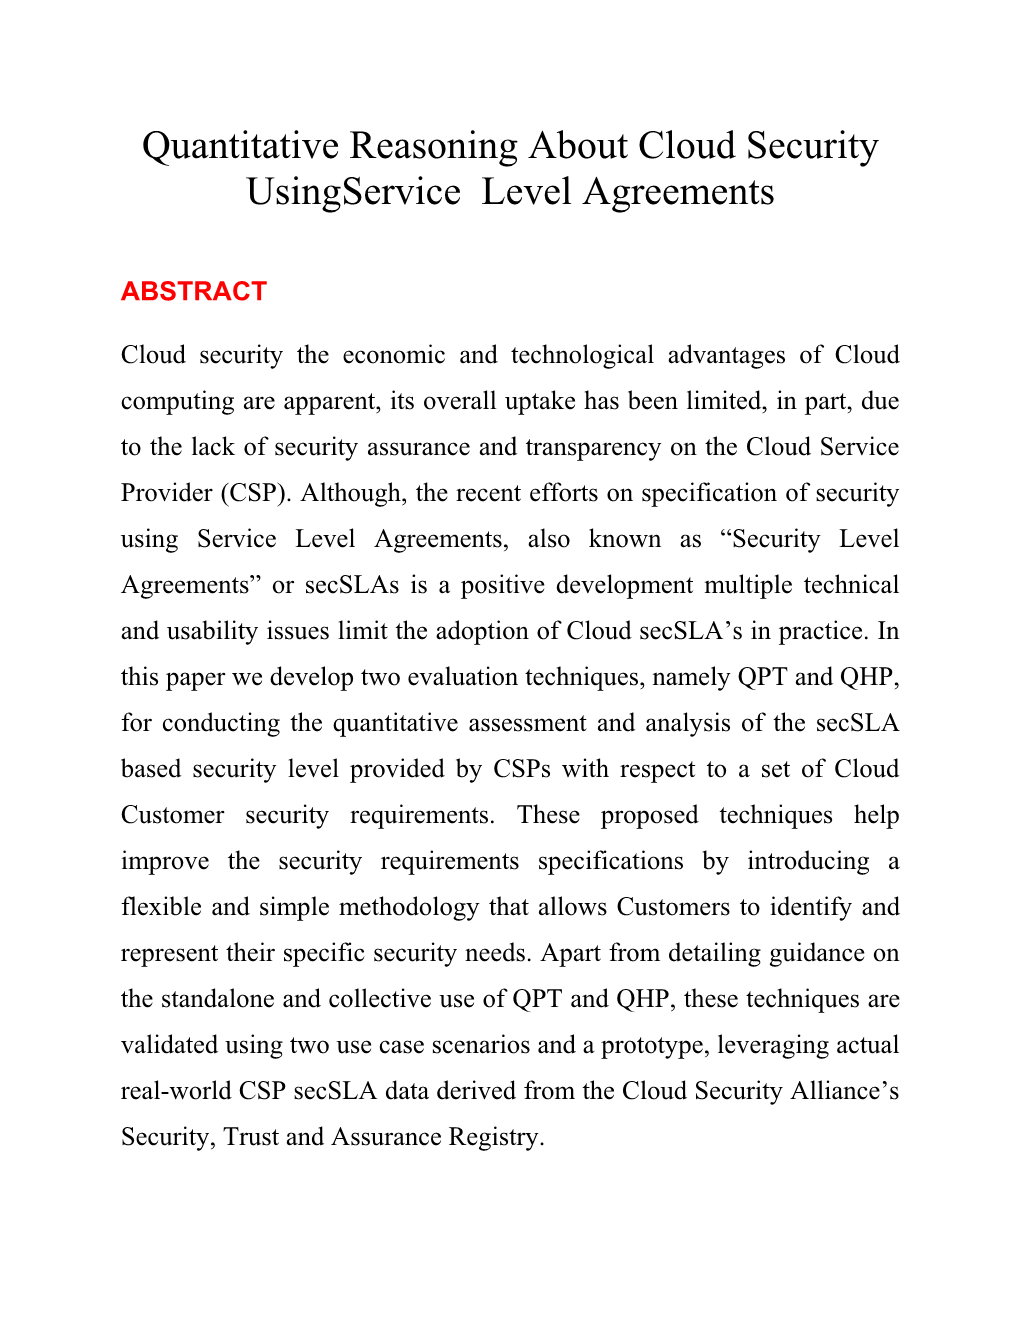 Quantitative Reasoning About Cloud Security Usingservice Level Agreements